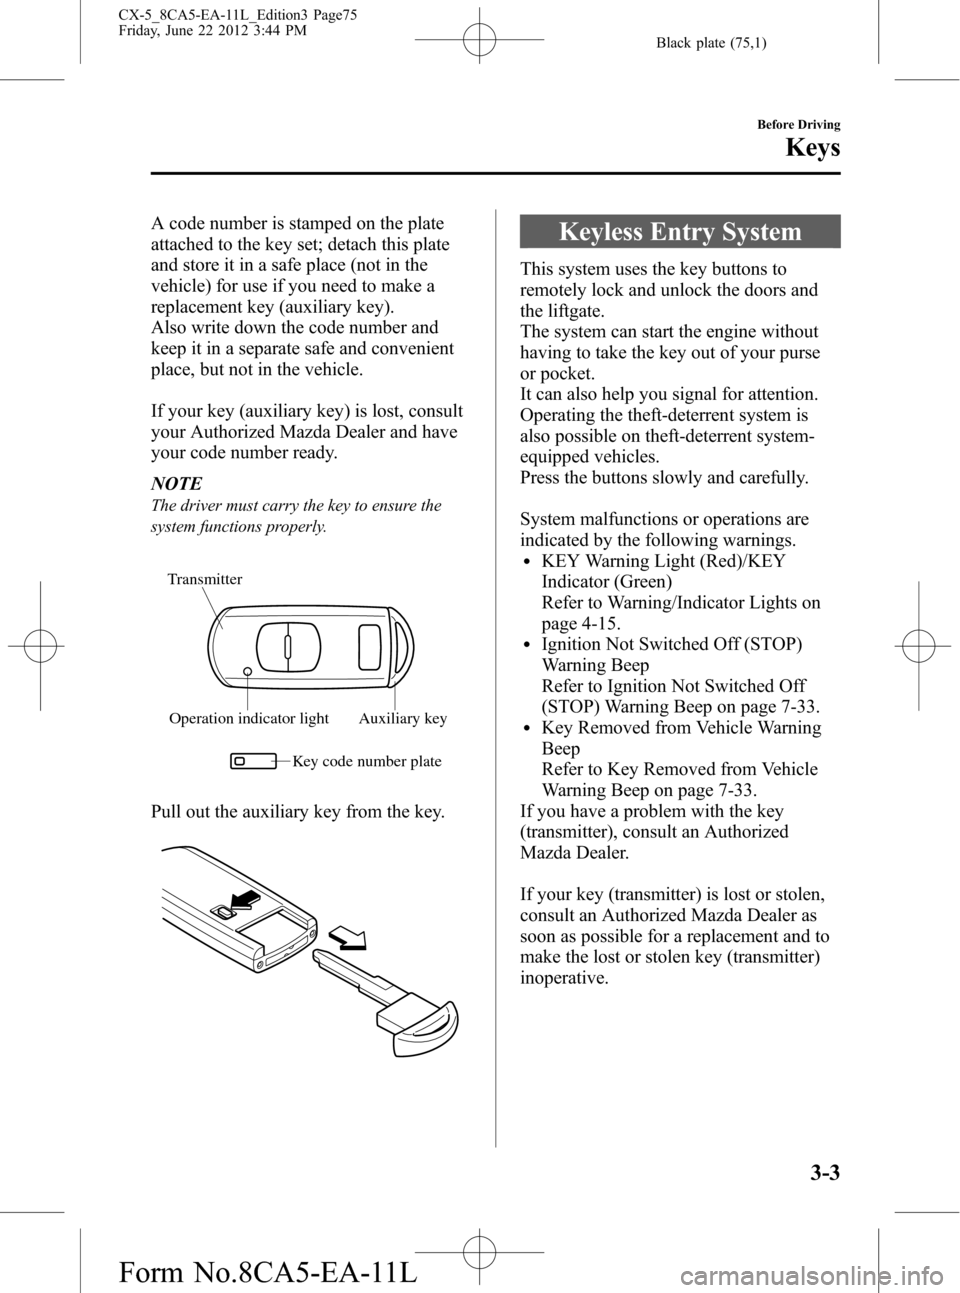 MAZDA MODEL CX-5 2013  Owners Manual (in English) Black plate (75,1)
A code number is stamped on the plate
attached to the key set; detach this plate
and store it in a safe place (not in the
vehicle) for use if you need to make a
replacement key (aux